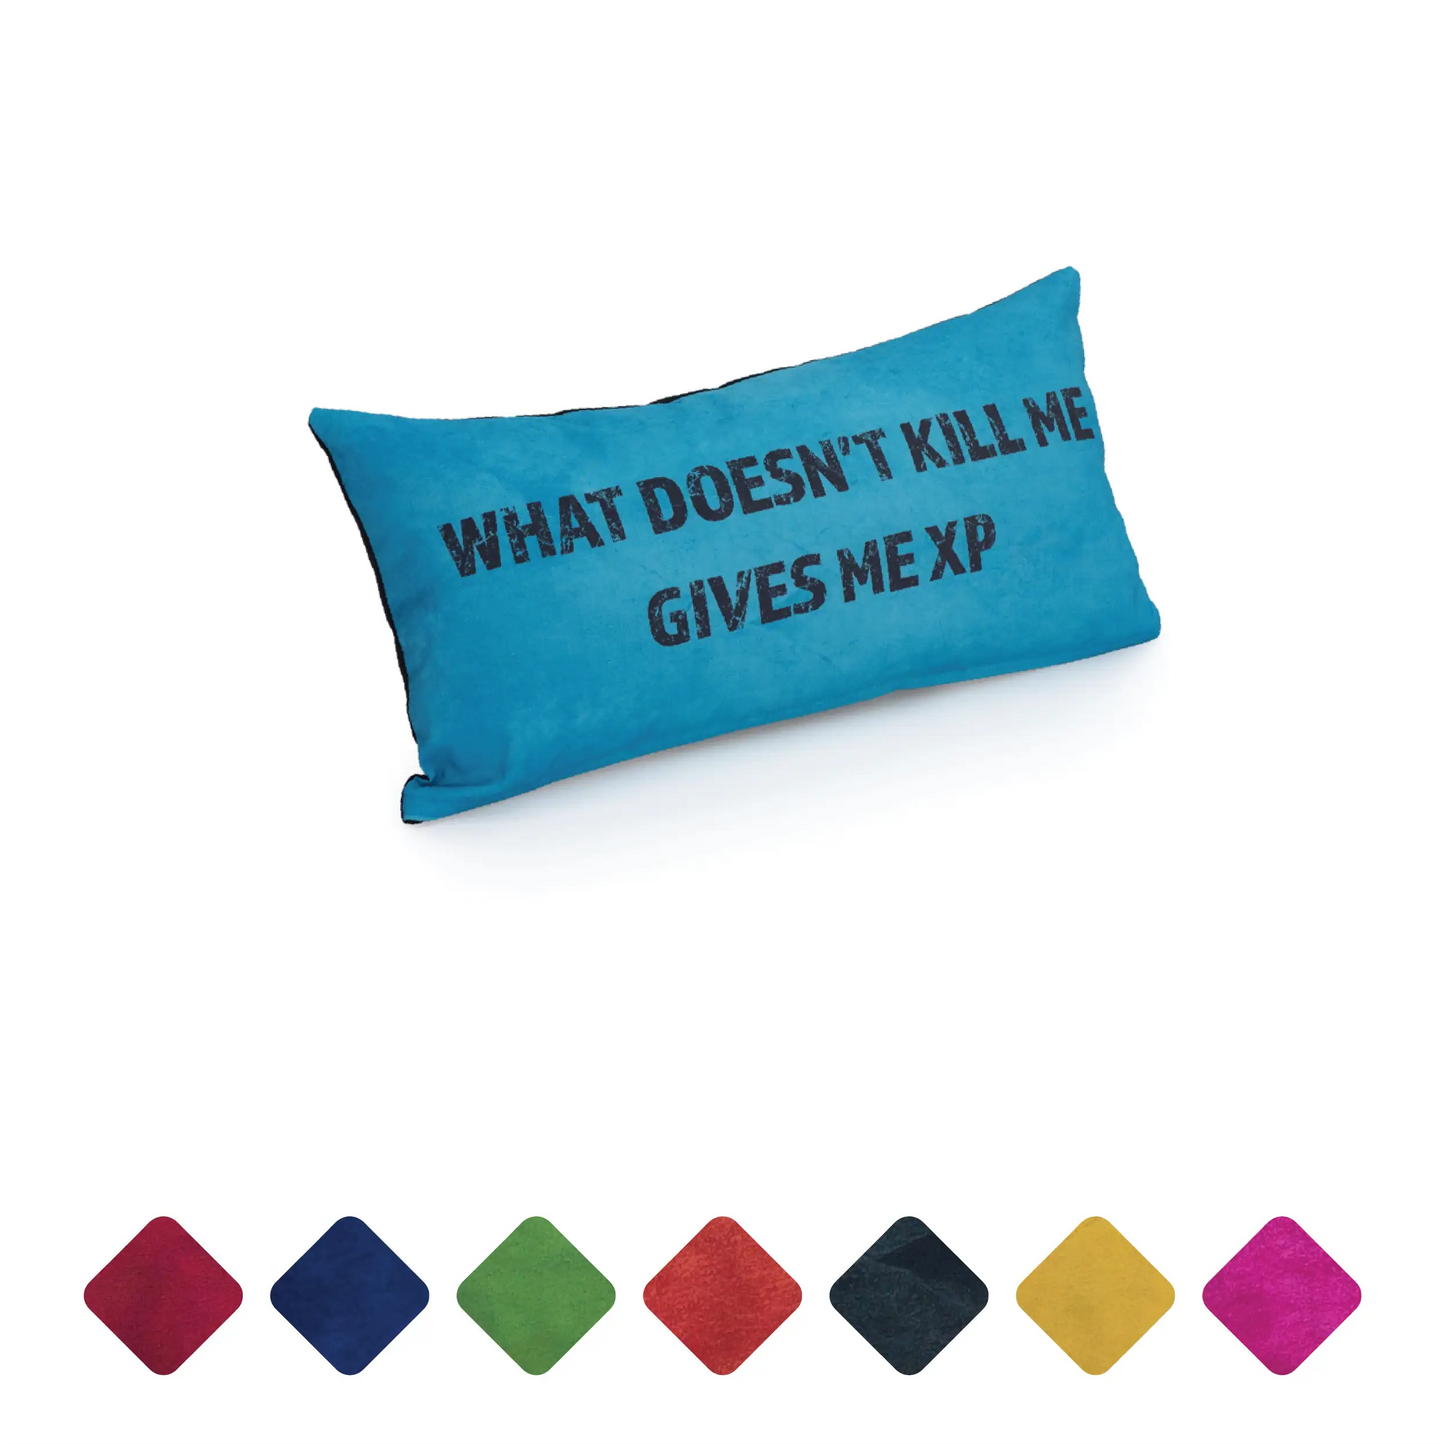 A Turq pillow with the text "I don't stop when I'm tired, I stop when I'm done."